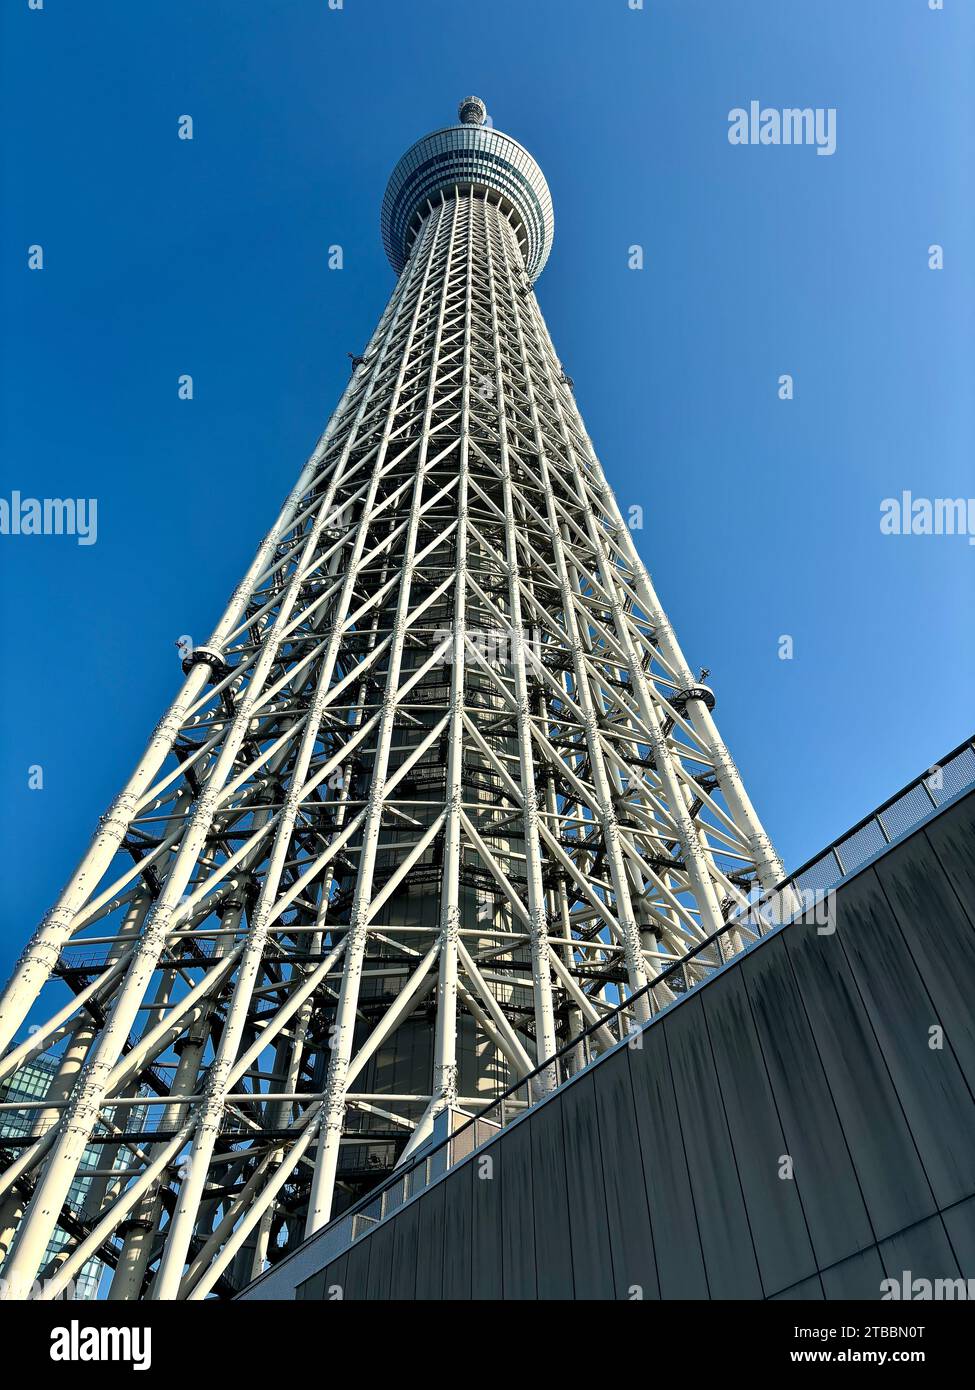 Completed in 2012, the Tokyo Skytree is located in the Sumida ward of Tokyo, Japan and is one of the tallest structures in the world. Stock Photo